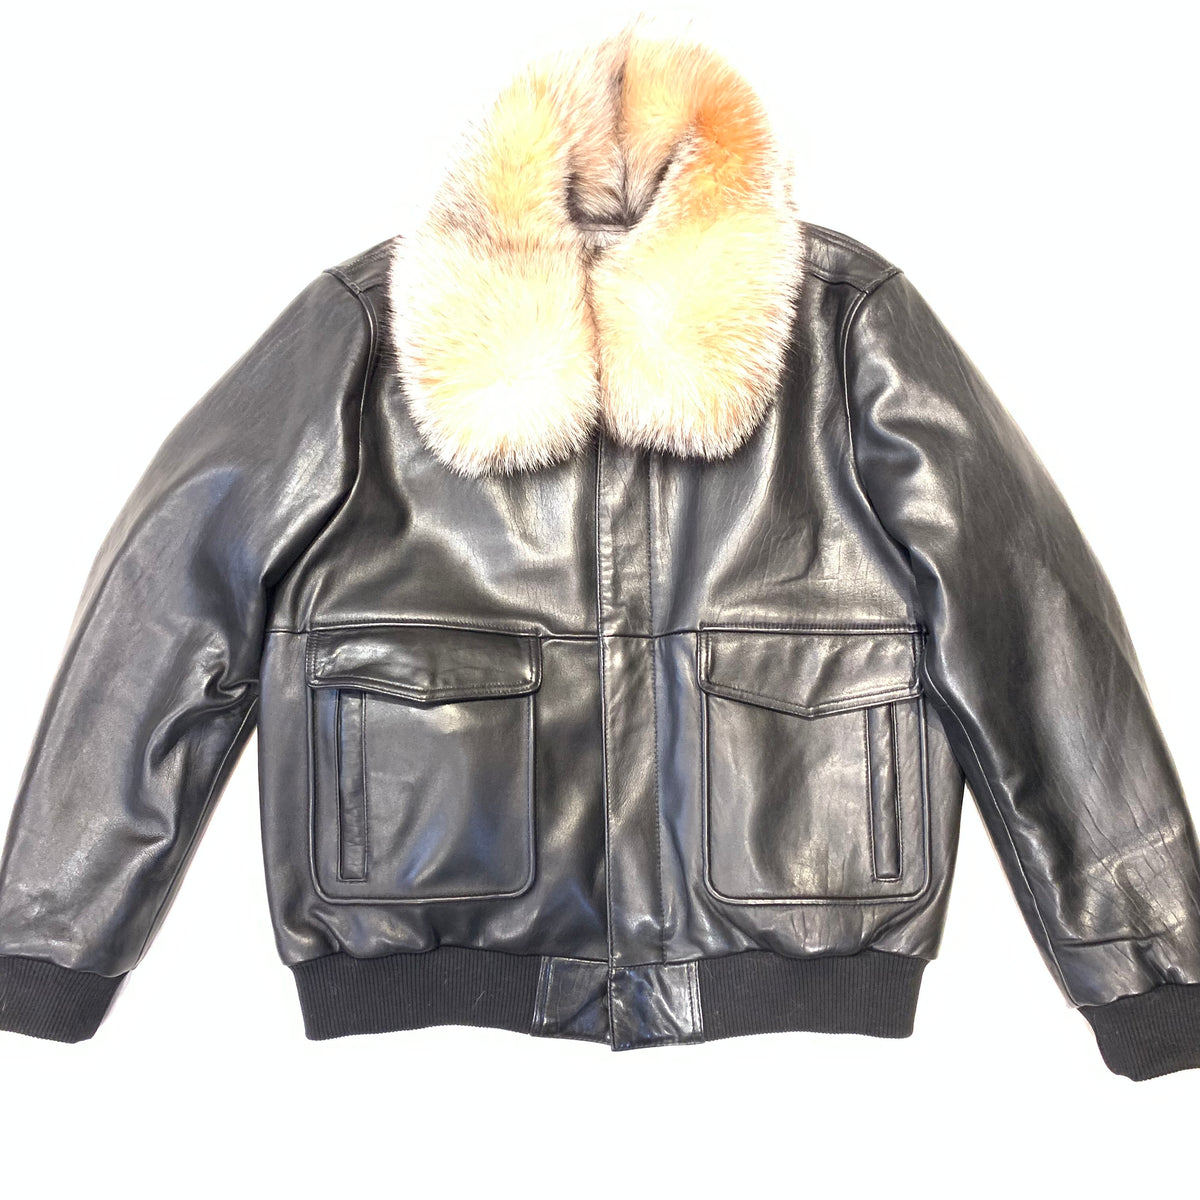 Daniels Leather Black Lambskin Red Fox Collar Bomber Jacket - Dudes Boutique